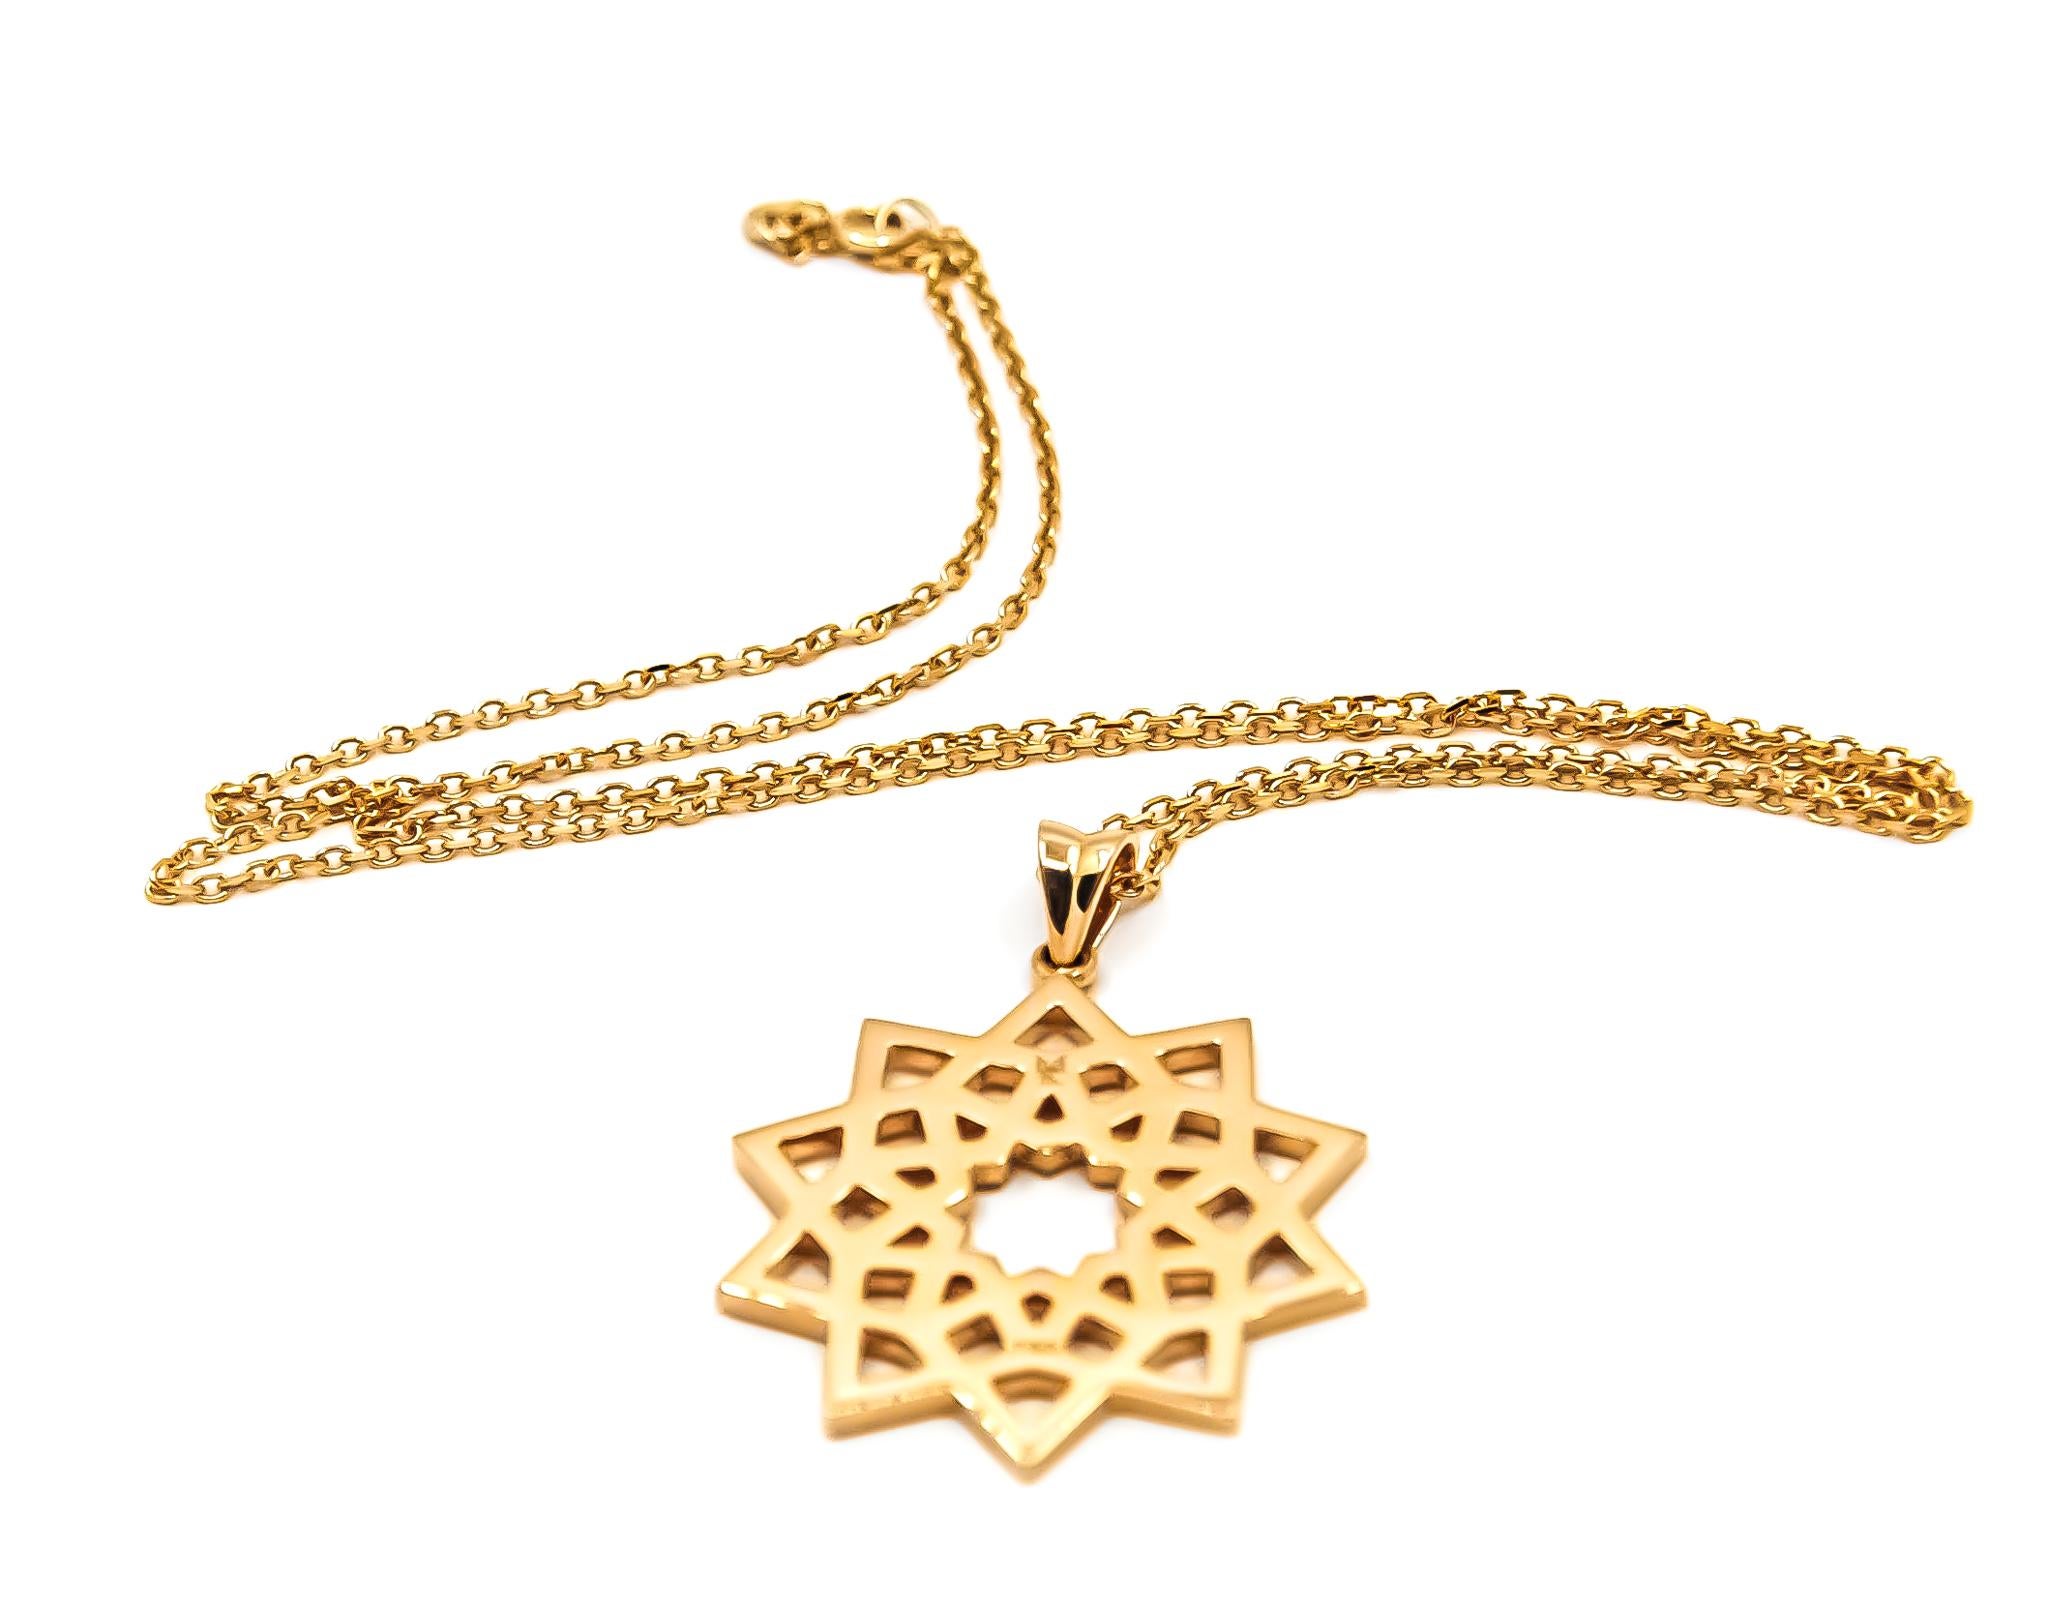 Arabesque Deco Andalusian Style Pendant Necklace in 18kt Gold.

The design of the pendant is inspired by the Andalusian Style and motifs found in Al Hambra Palace in Granada in Spain.